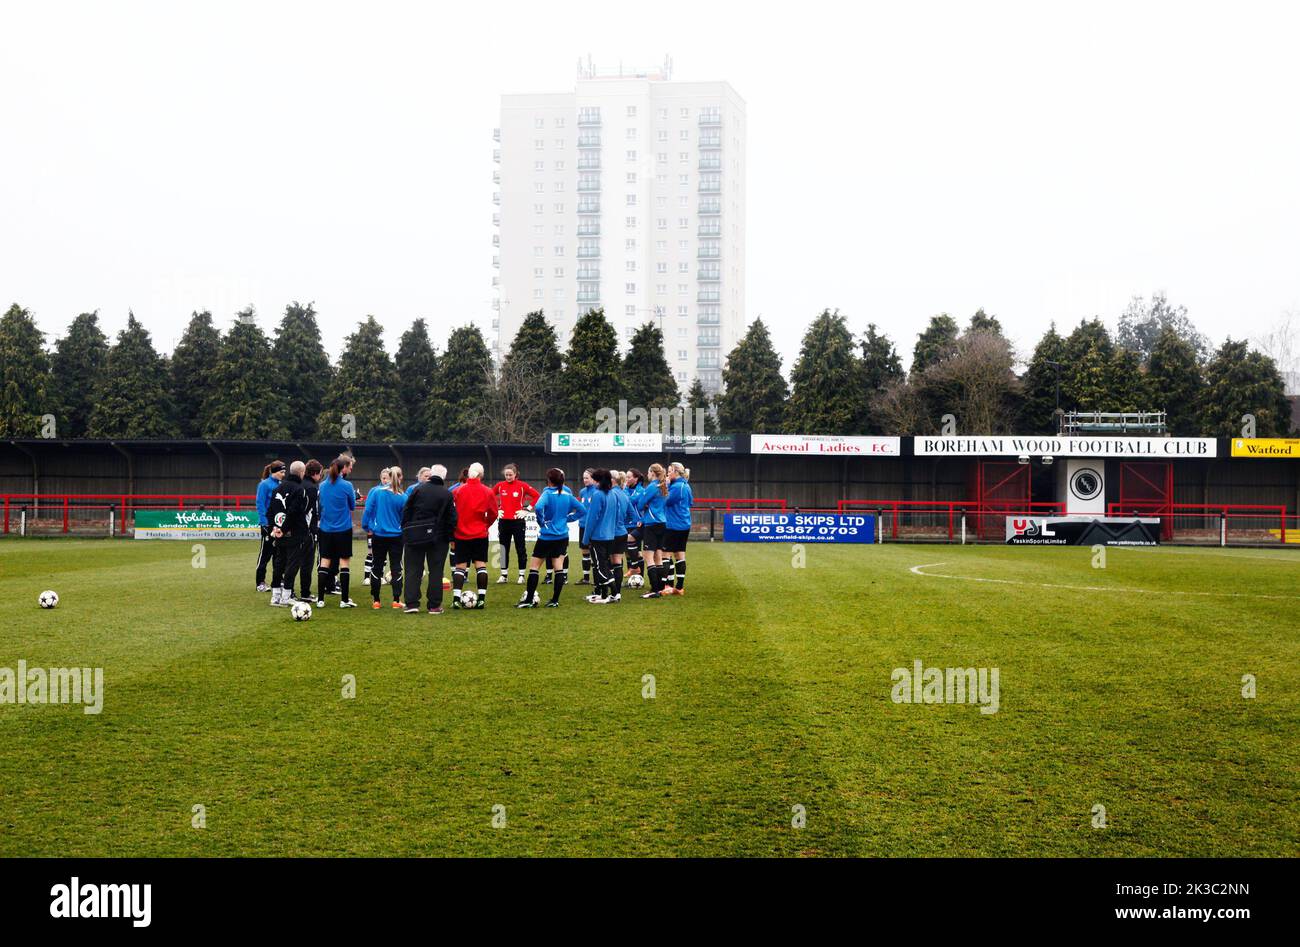 The day before the Champions League quarterfinals, Arsenal vs. Linköping football club. Linköping FC took the lead in the Champions League quarter-final against Arsenal at Meadow Park outside London, UK. In ther picture: Linköping football club is training and preparing for tomorrow's match. Stock Photo